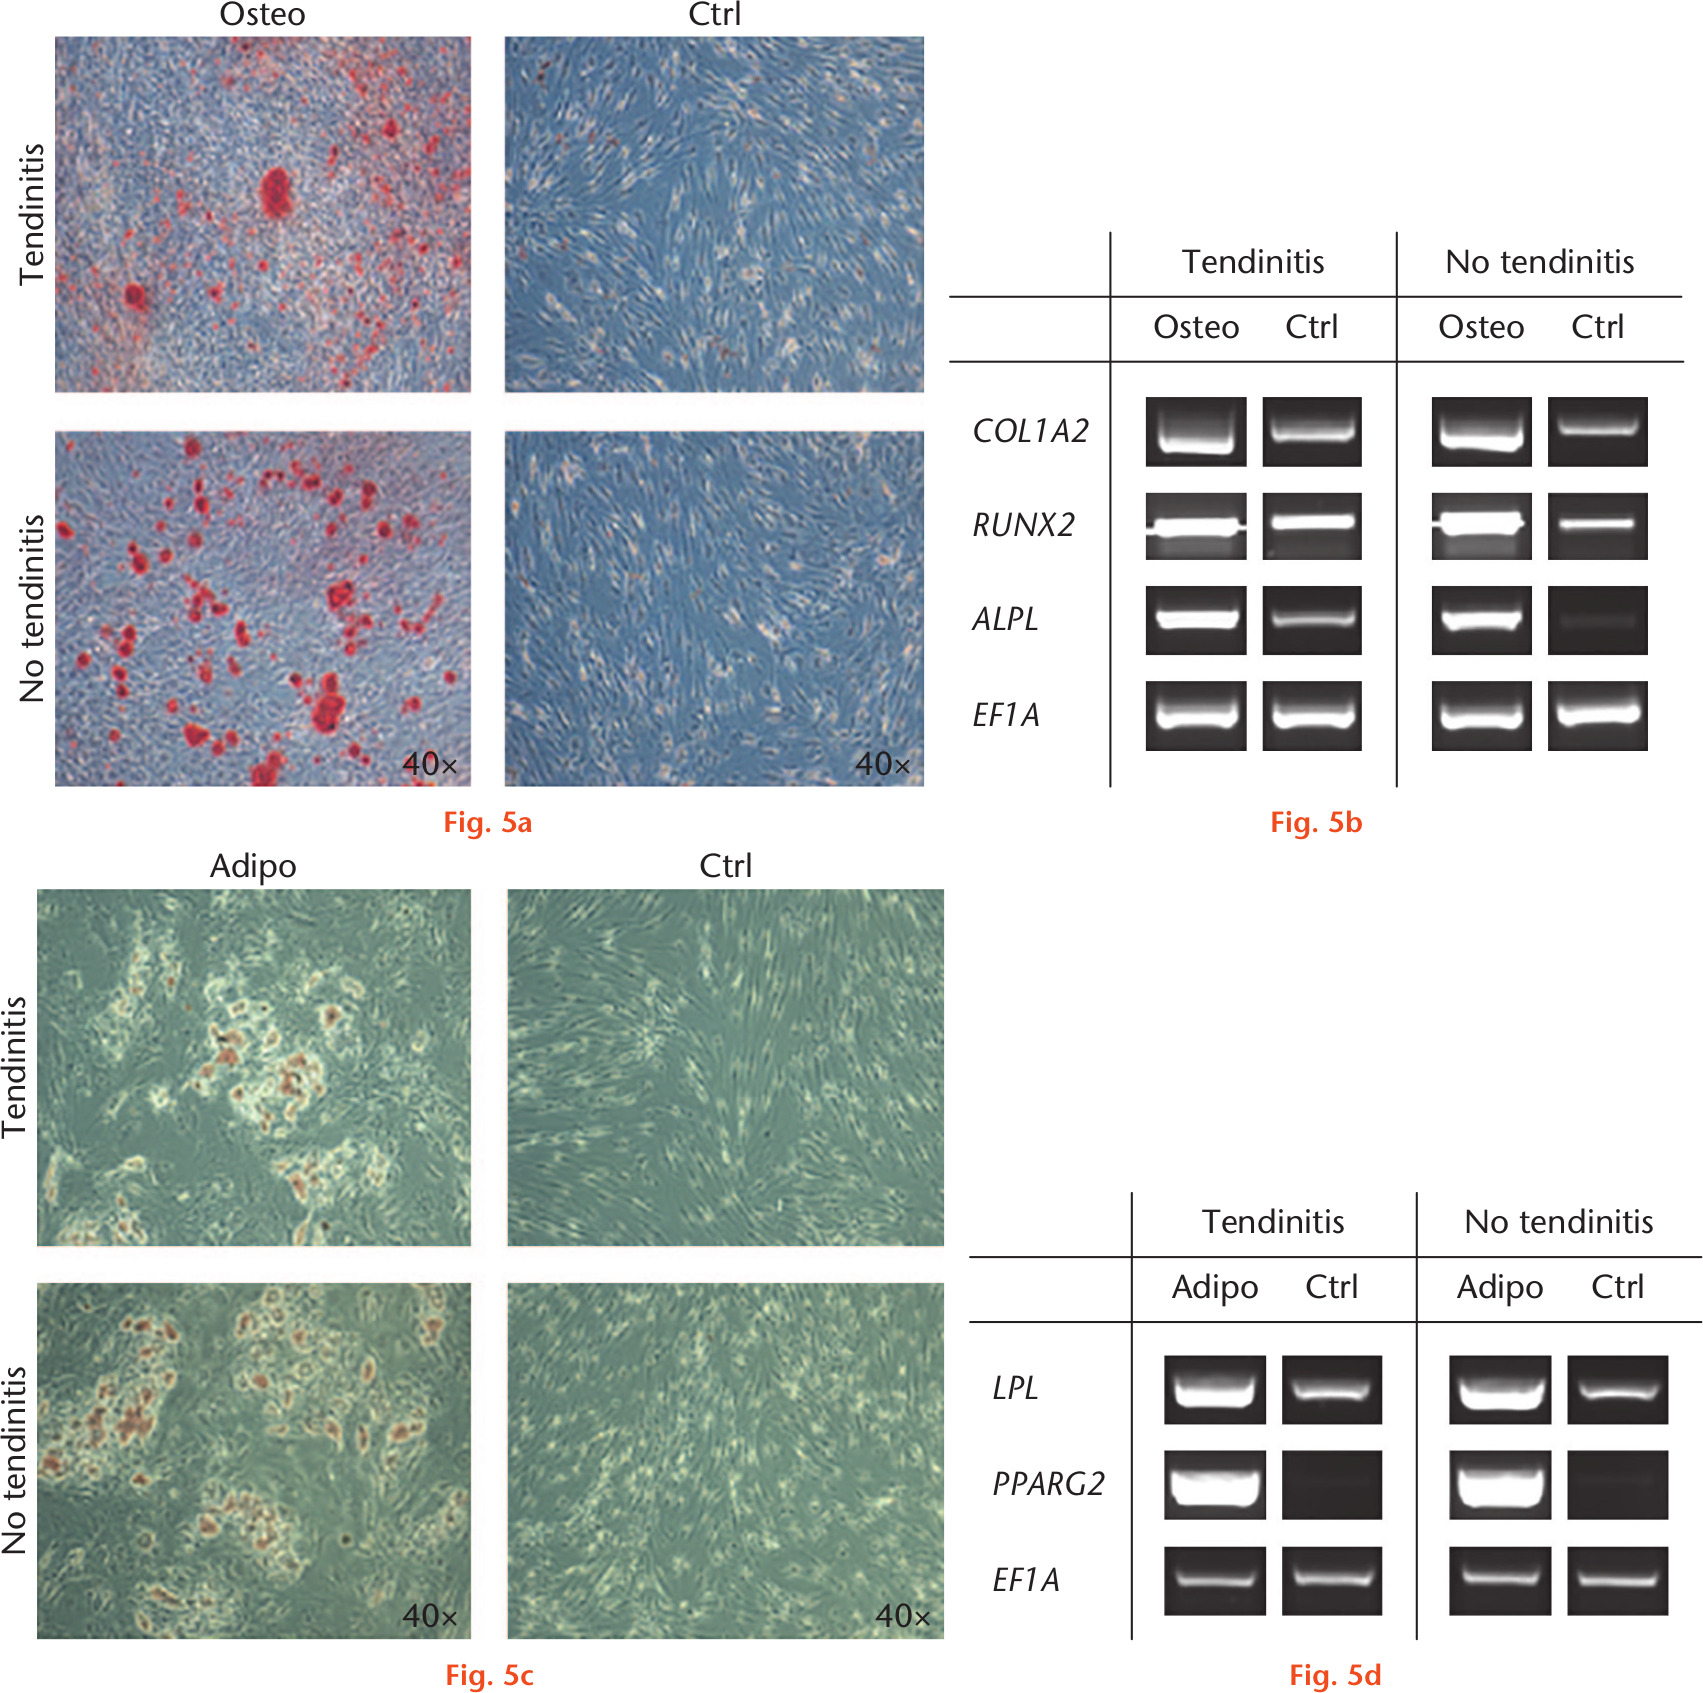 Fig. 5 
            Osteogenic and adipogenic differentiation of cells isolated from inflamed and non-inflamed long head of the biceps (LHB) samples at four weeks. a) Cultures treated with osteogenic supplements produced a mineralized extracellular matrix as shown by intense staining for Alizarin Red. Control cultures did not produce a mineralized matrix. b) Real-time polymerase chain reaction (RT-PCR) revealed that cultures of both groups expressed the runt-related transcription factor 2 (RUNX2), alkaline phosphatase (ALPL), and collagen type I alpha 2 (COL1A2) in response to osteogenic stimuli compared with controls. c) Cells cultivated in adipogenic medium showed formation of lipid droplets in both groups as determined by Oil red O staining. Cultivation in control medium, in contrast, did not result in droplet enrichment. d) Expression of the adipogenic marker genes lipoprotein lipase (LPL) and peroxisome proliferator-activated receptor gamma 2 (PPARG2) was increased in both groups treated with adipogenic medium, but was not detectable in cells cultivated with control medium. The housekeeping gene elongation factor 1α (EF1A) showed equal expression levels in all groups. Six donor samples were tested, and representative images from three different donors are shown. Osteo, osteogenic; Adipo, adipogenic; Ctrl, control.
          